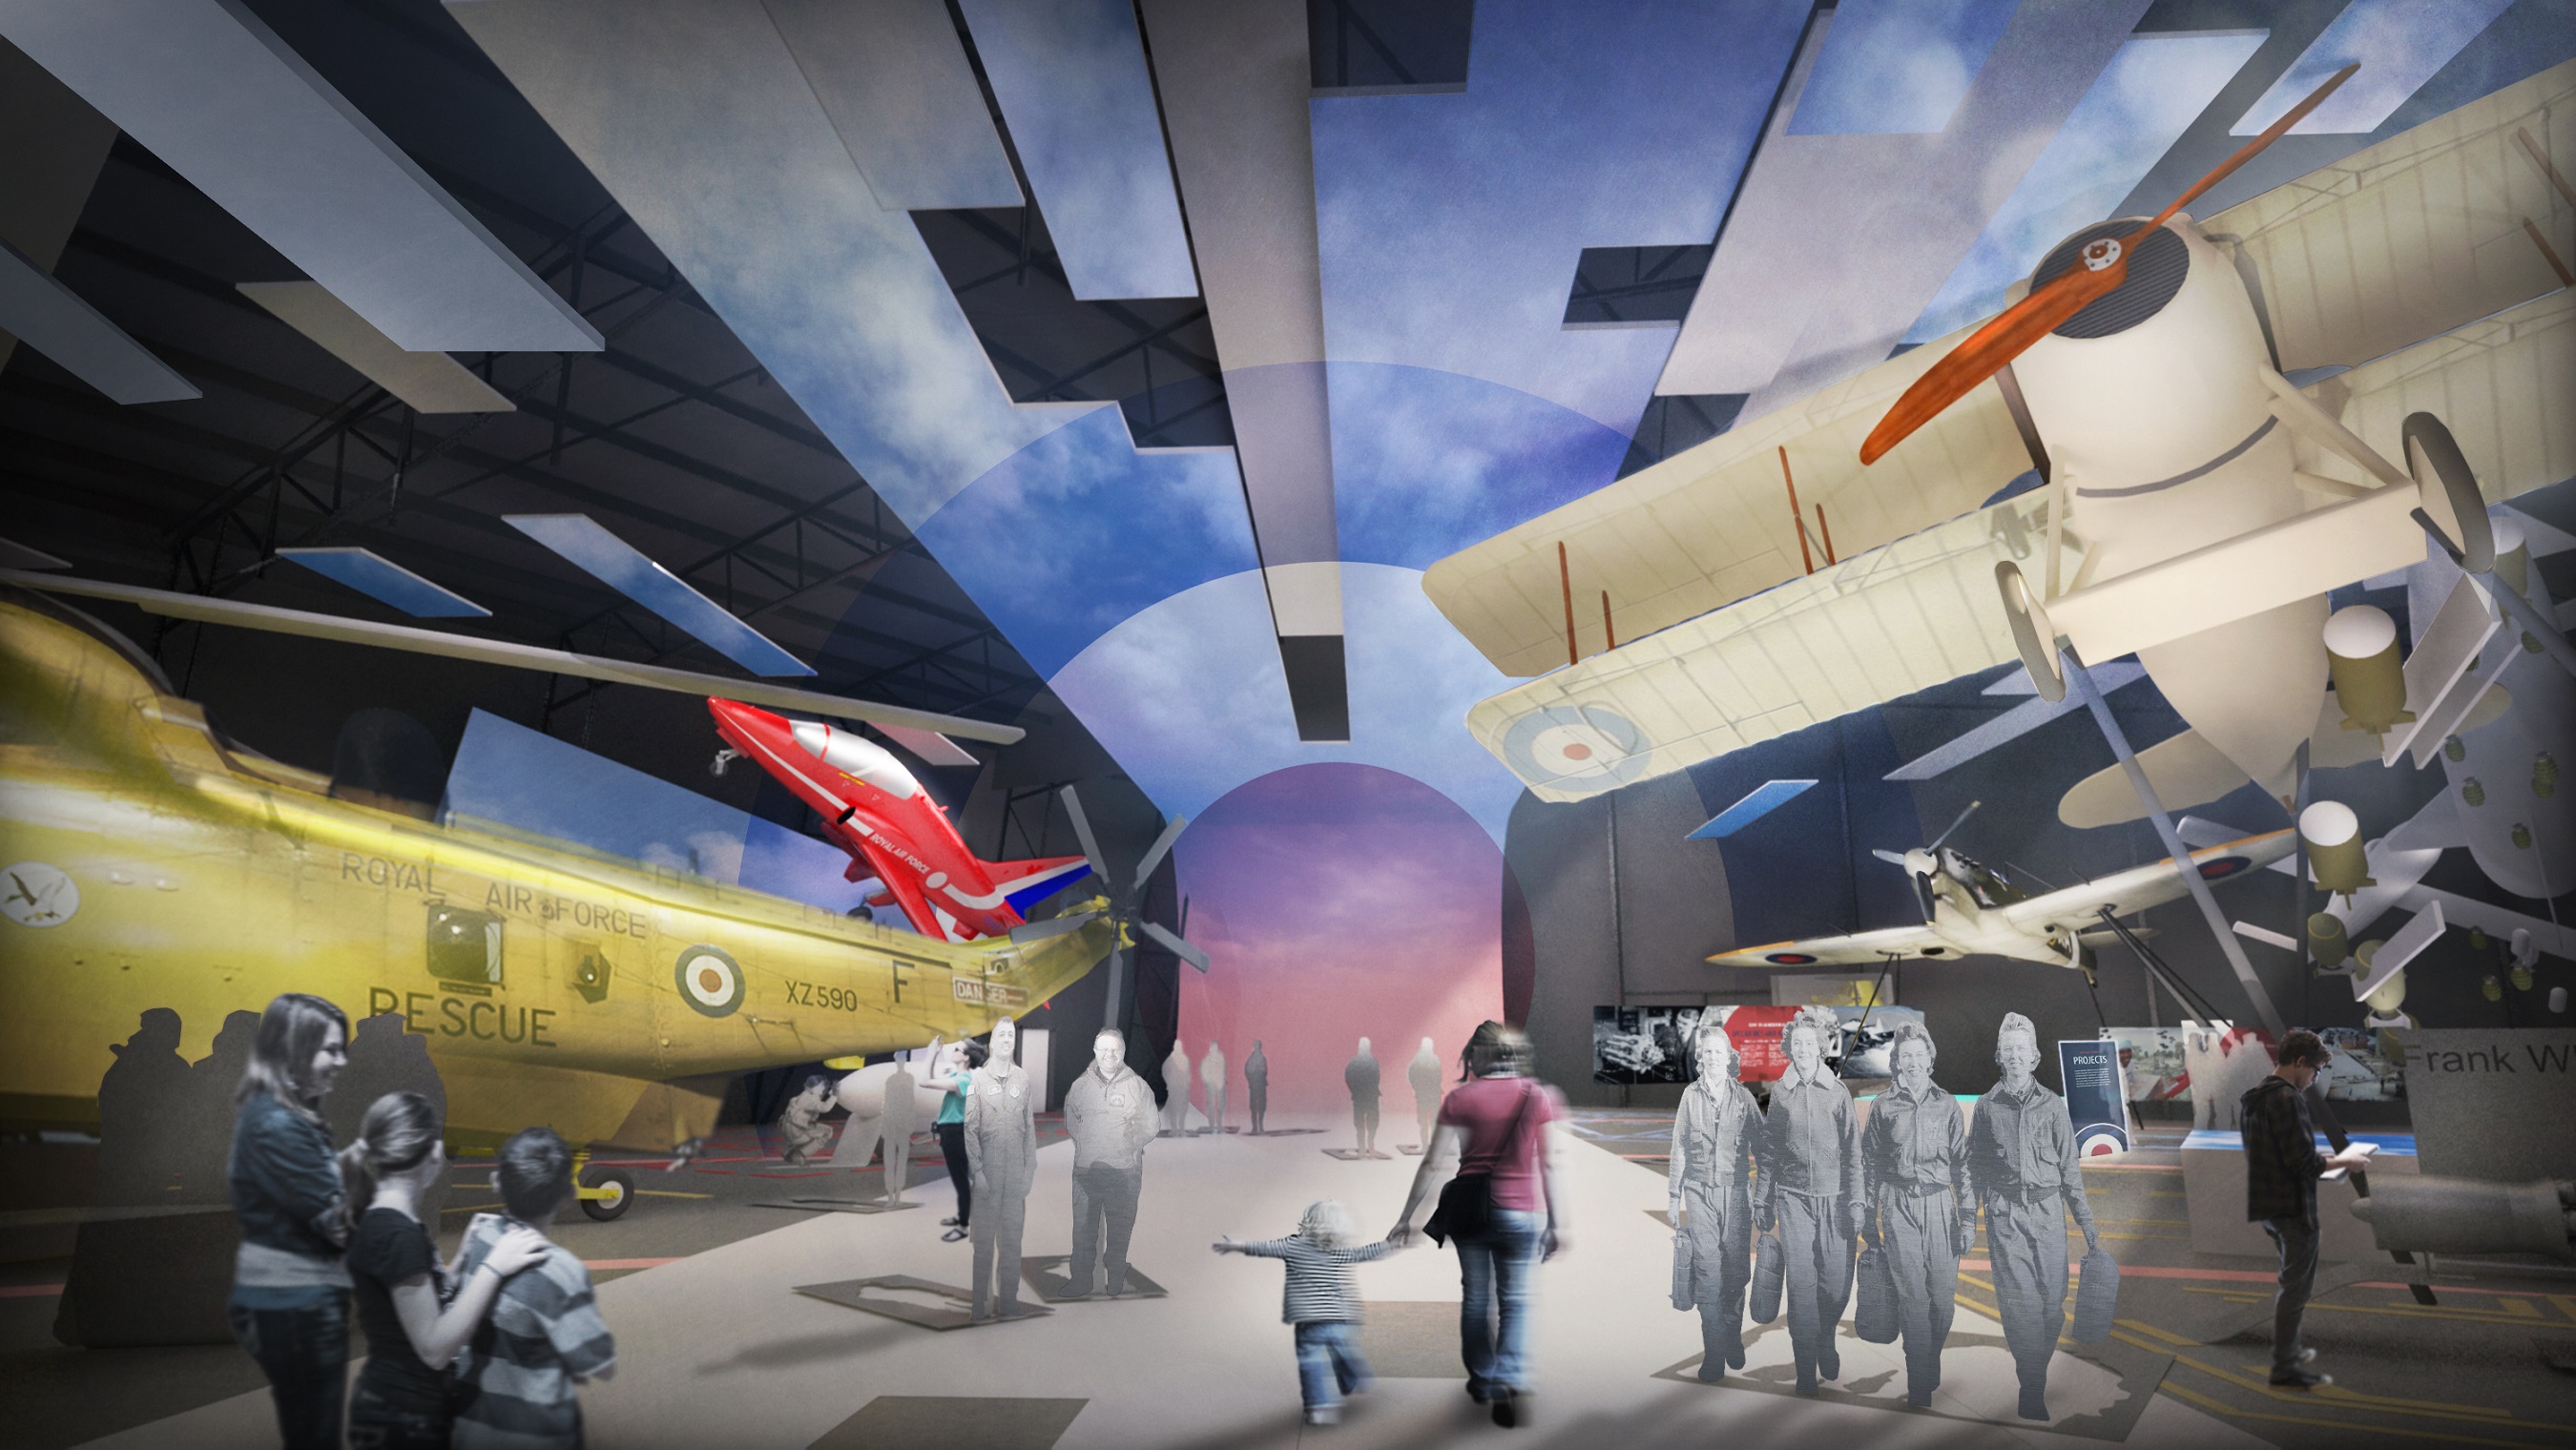 Planned entrance to the new site at RAF Museum, opening 2018 to celebrate 100 years of the Royal Air Force.